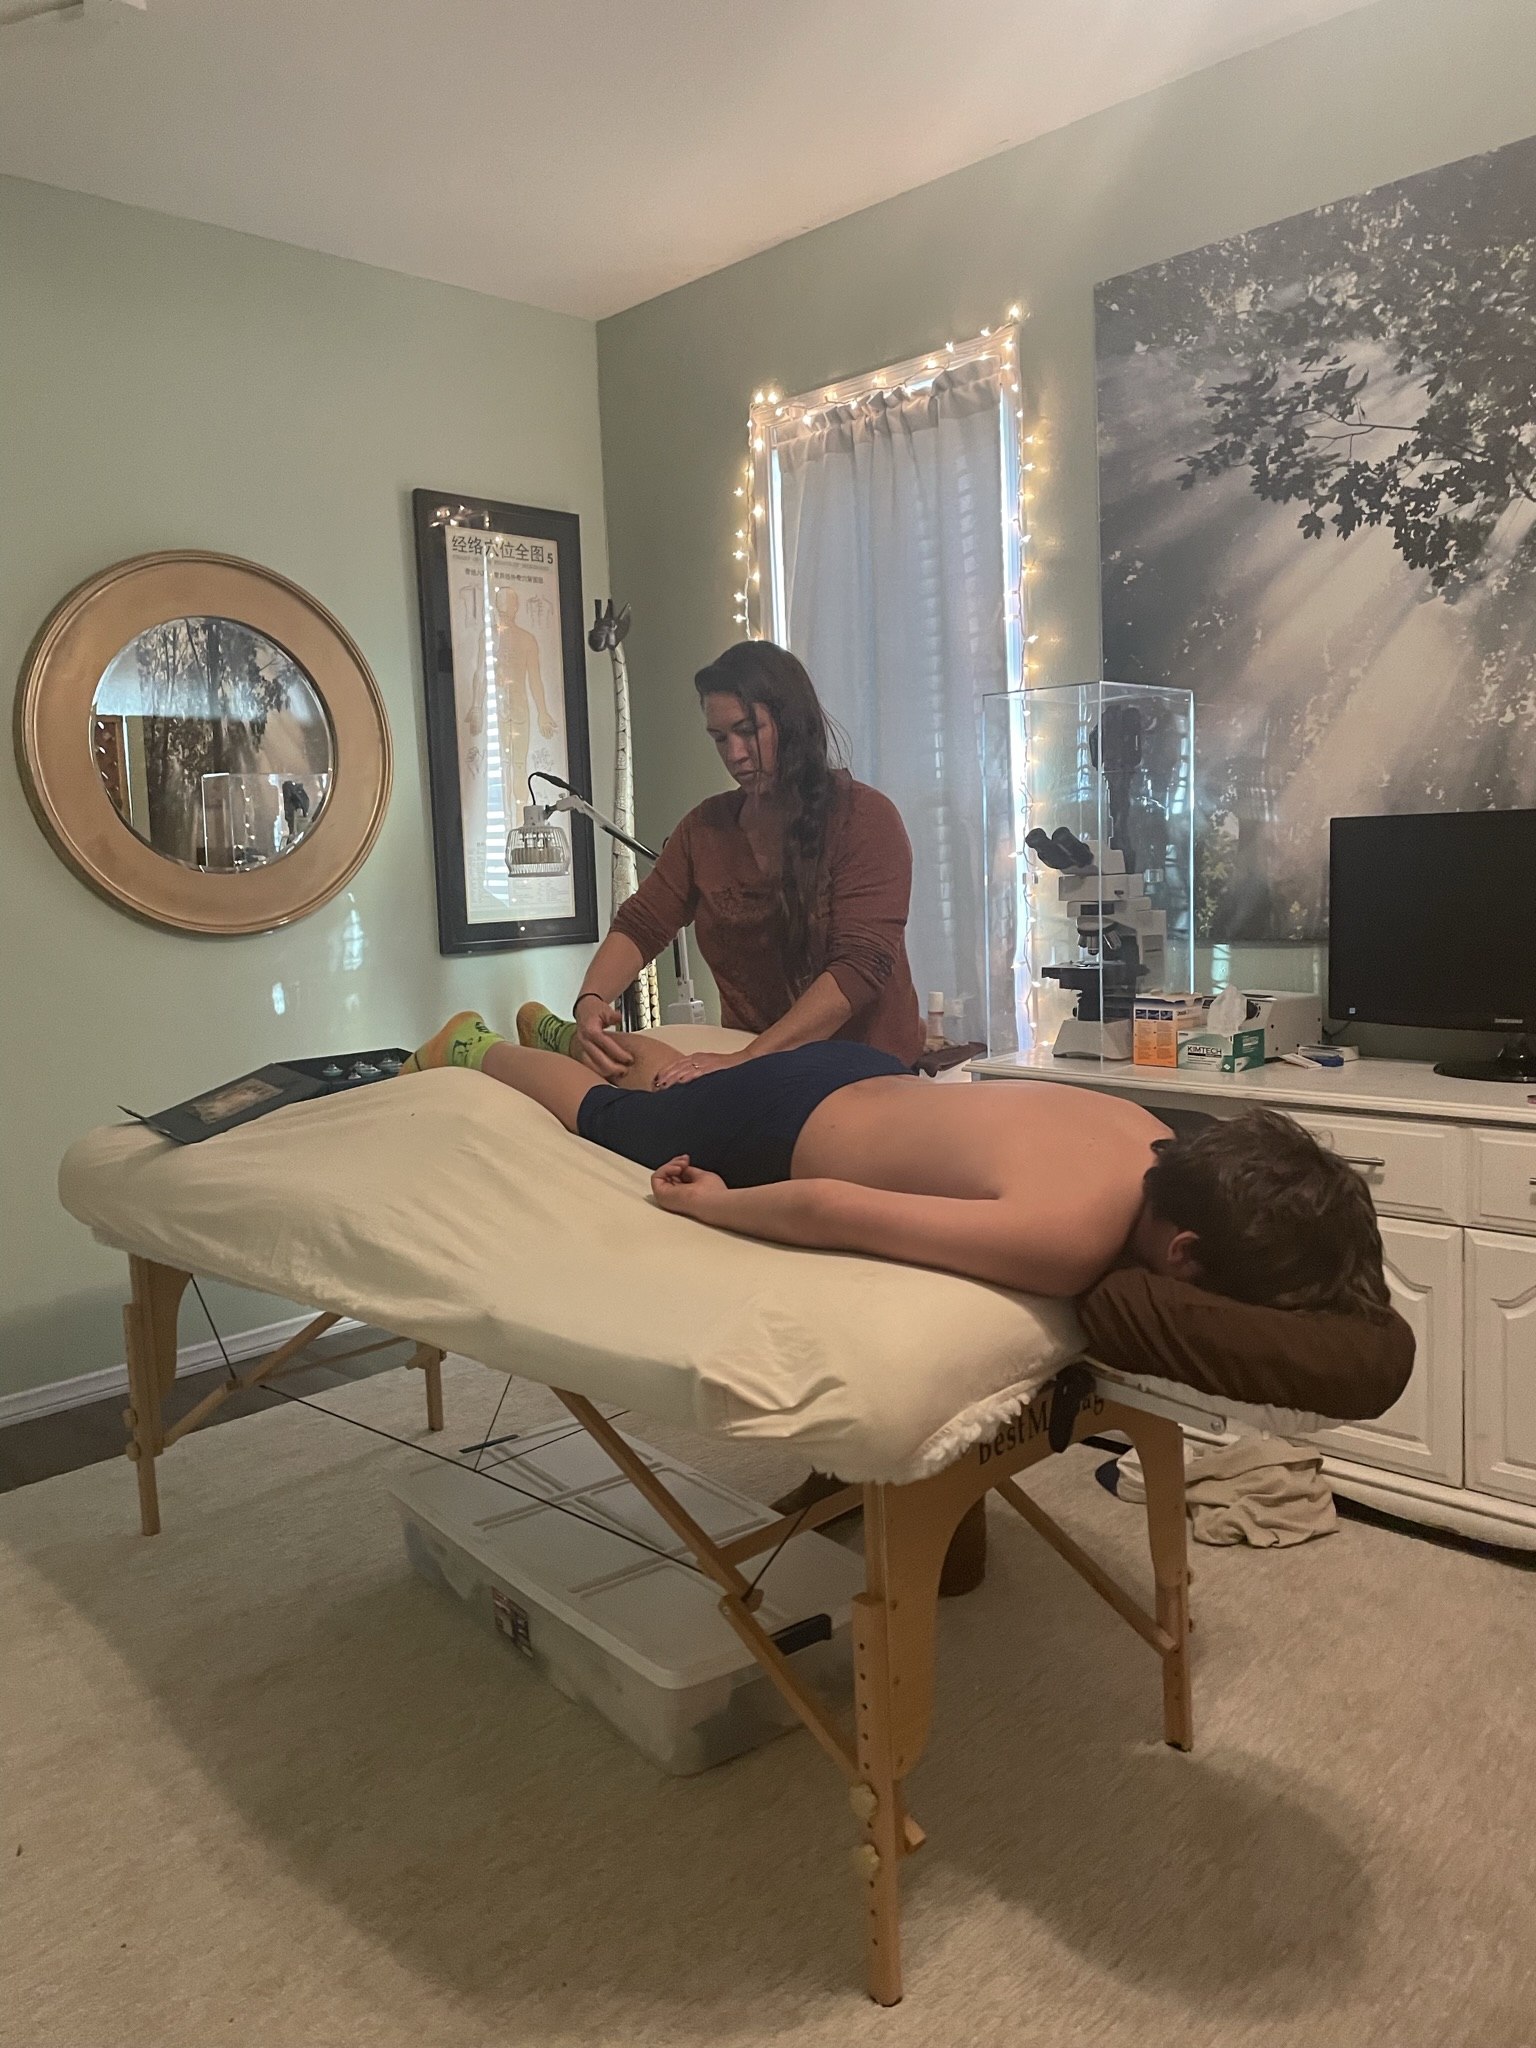 Mountain Healing Acupuncture Picture of massage in progress.